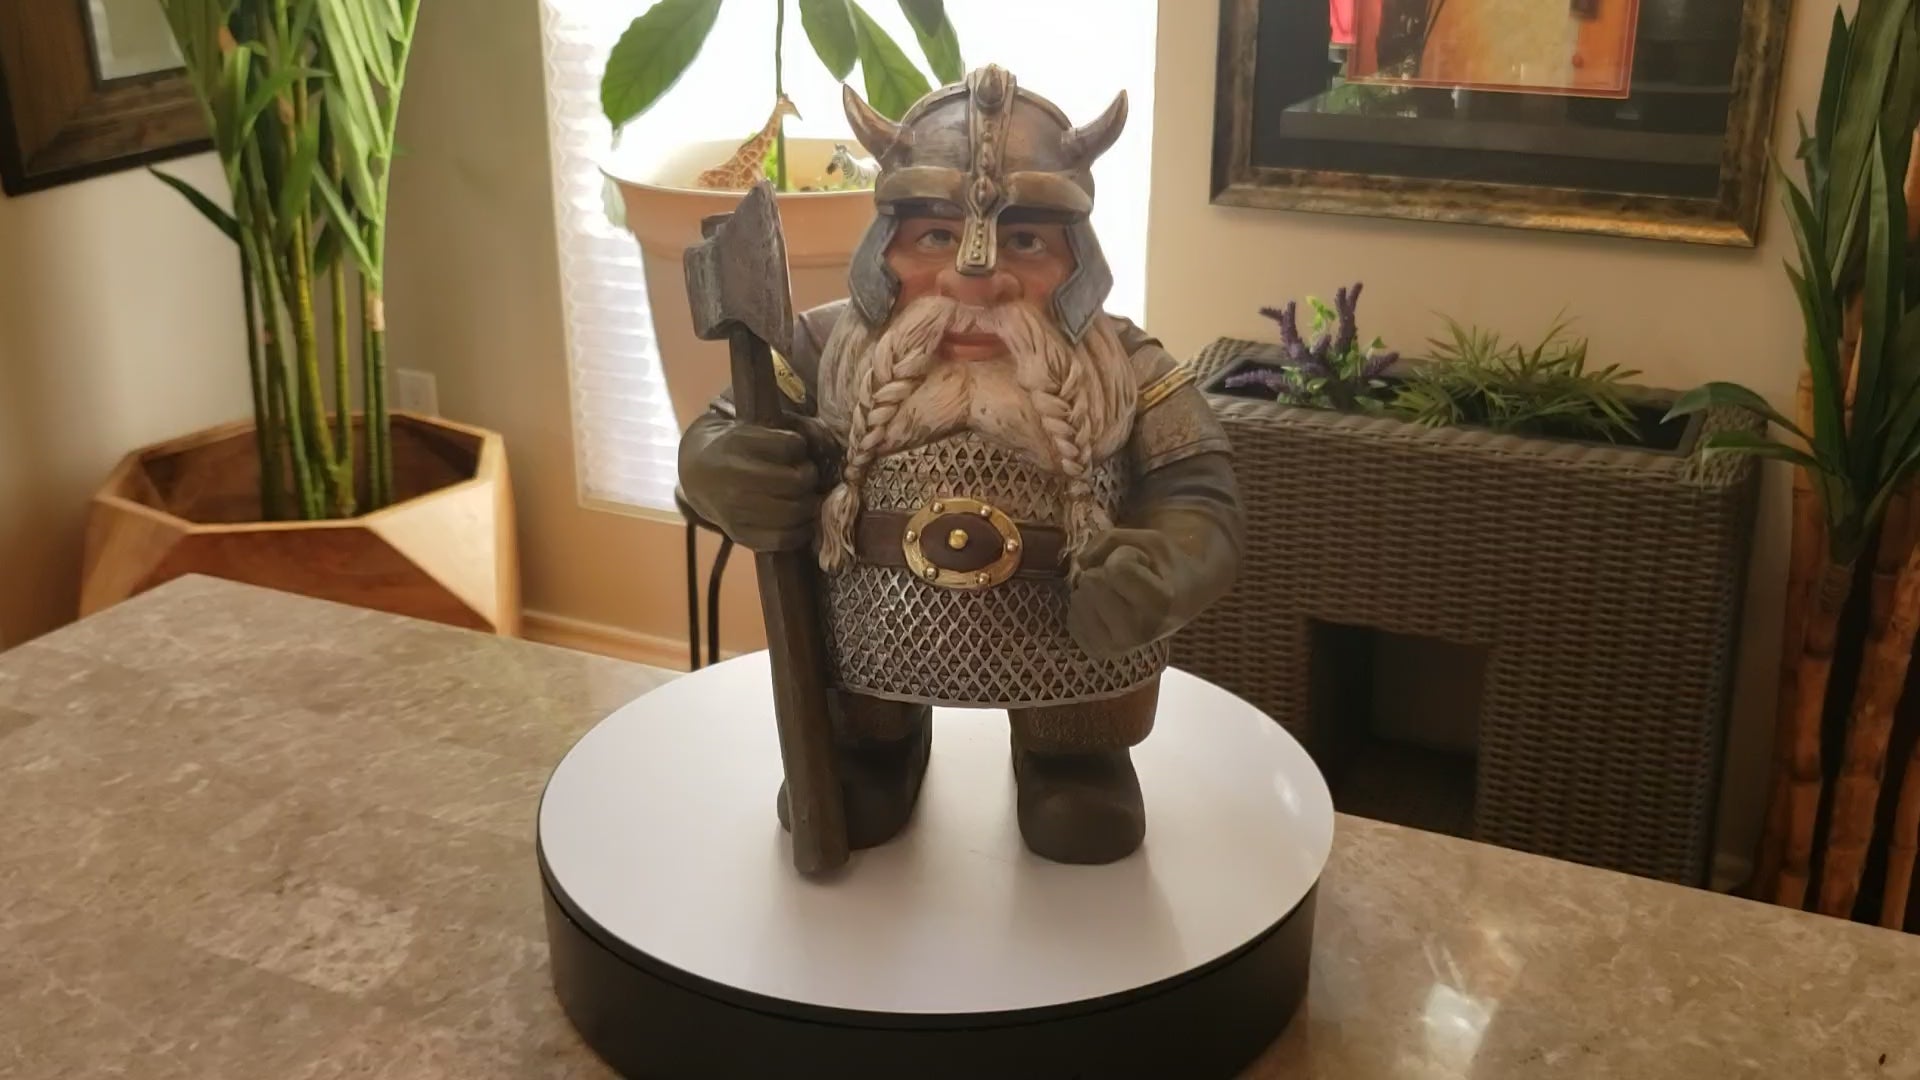 Auction for sale viking gnome statue